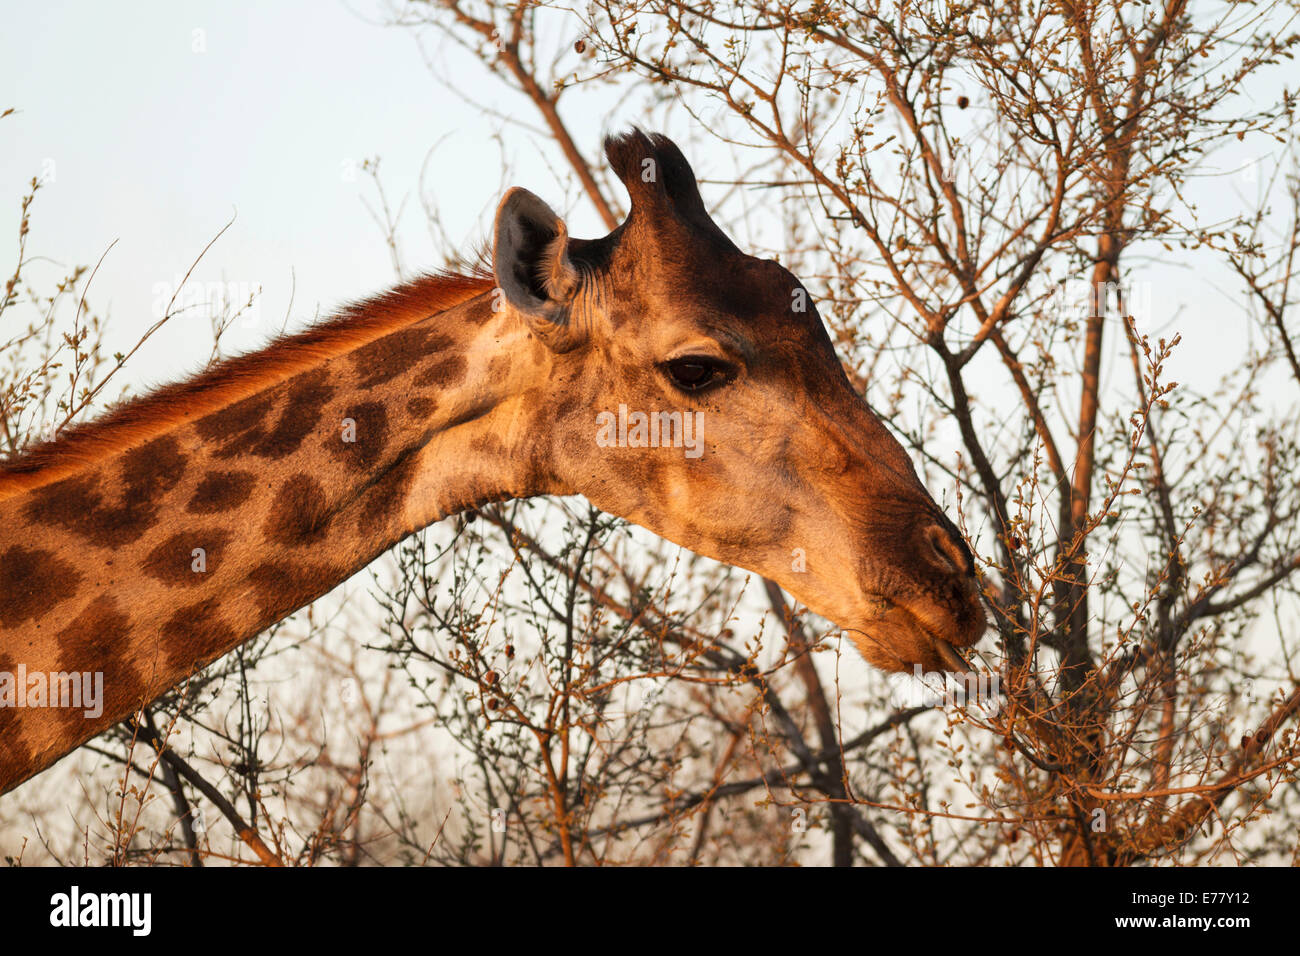 Southern Giraffe (Giraffa camelopardalis giraffa), female collects twigs and leaves with her extensible tongue Stock Photo